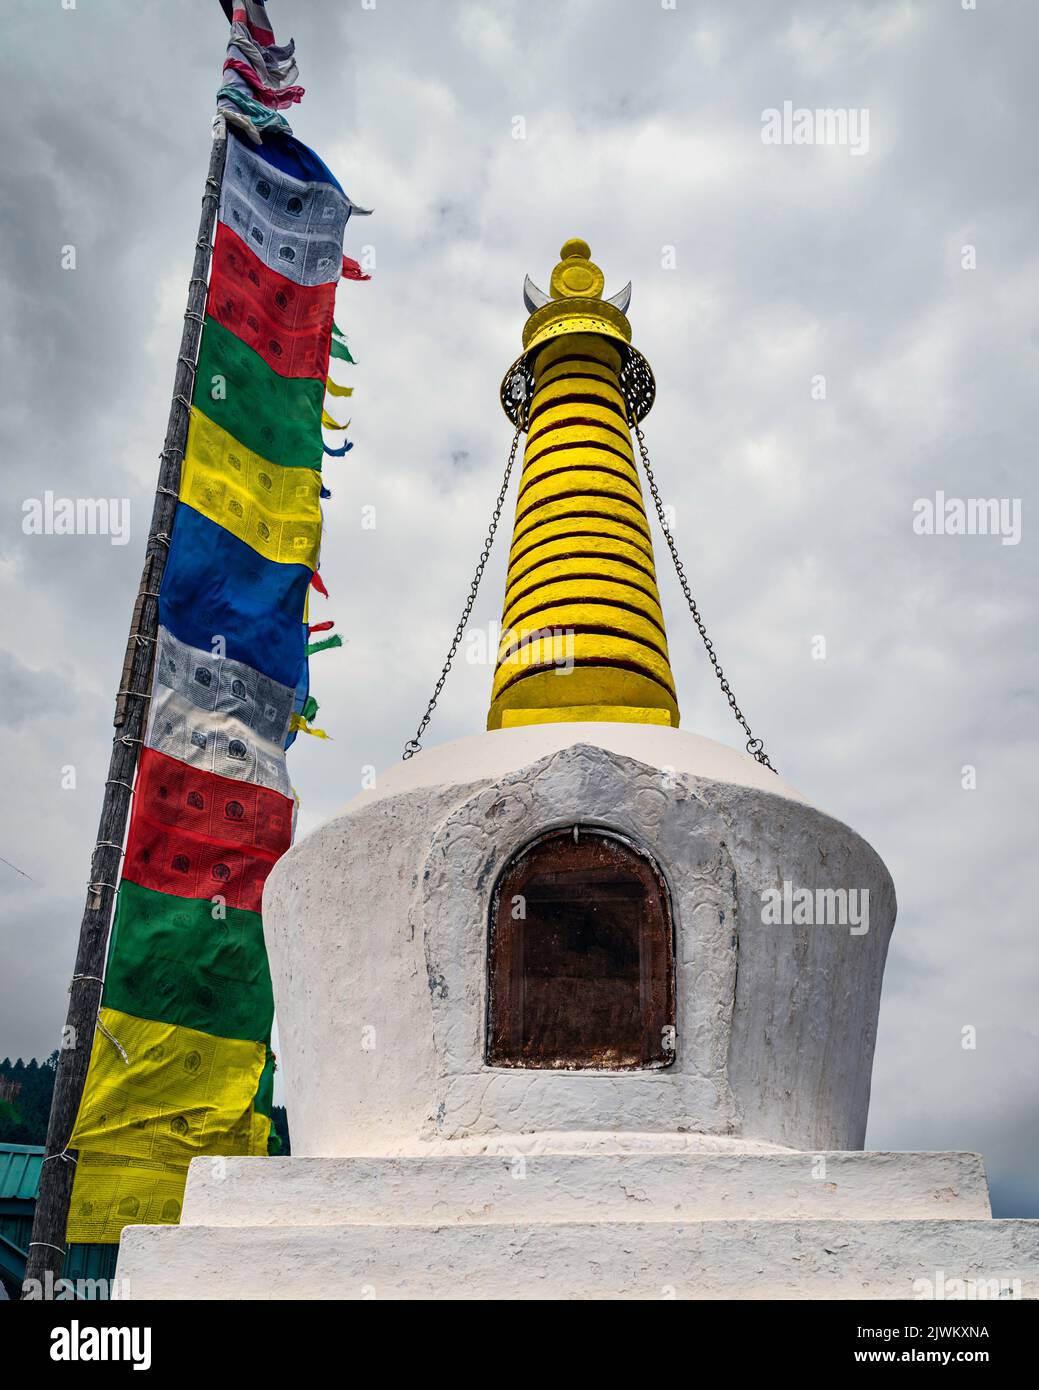 Colorful Buddist stupa flanked by multi-colorded prayer flags attached to wooden pole all under clouded sky outdoors in Kalpa, India. Stock Photo